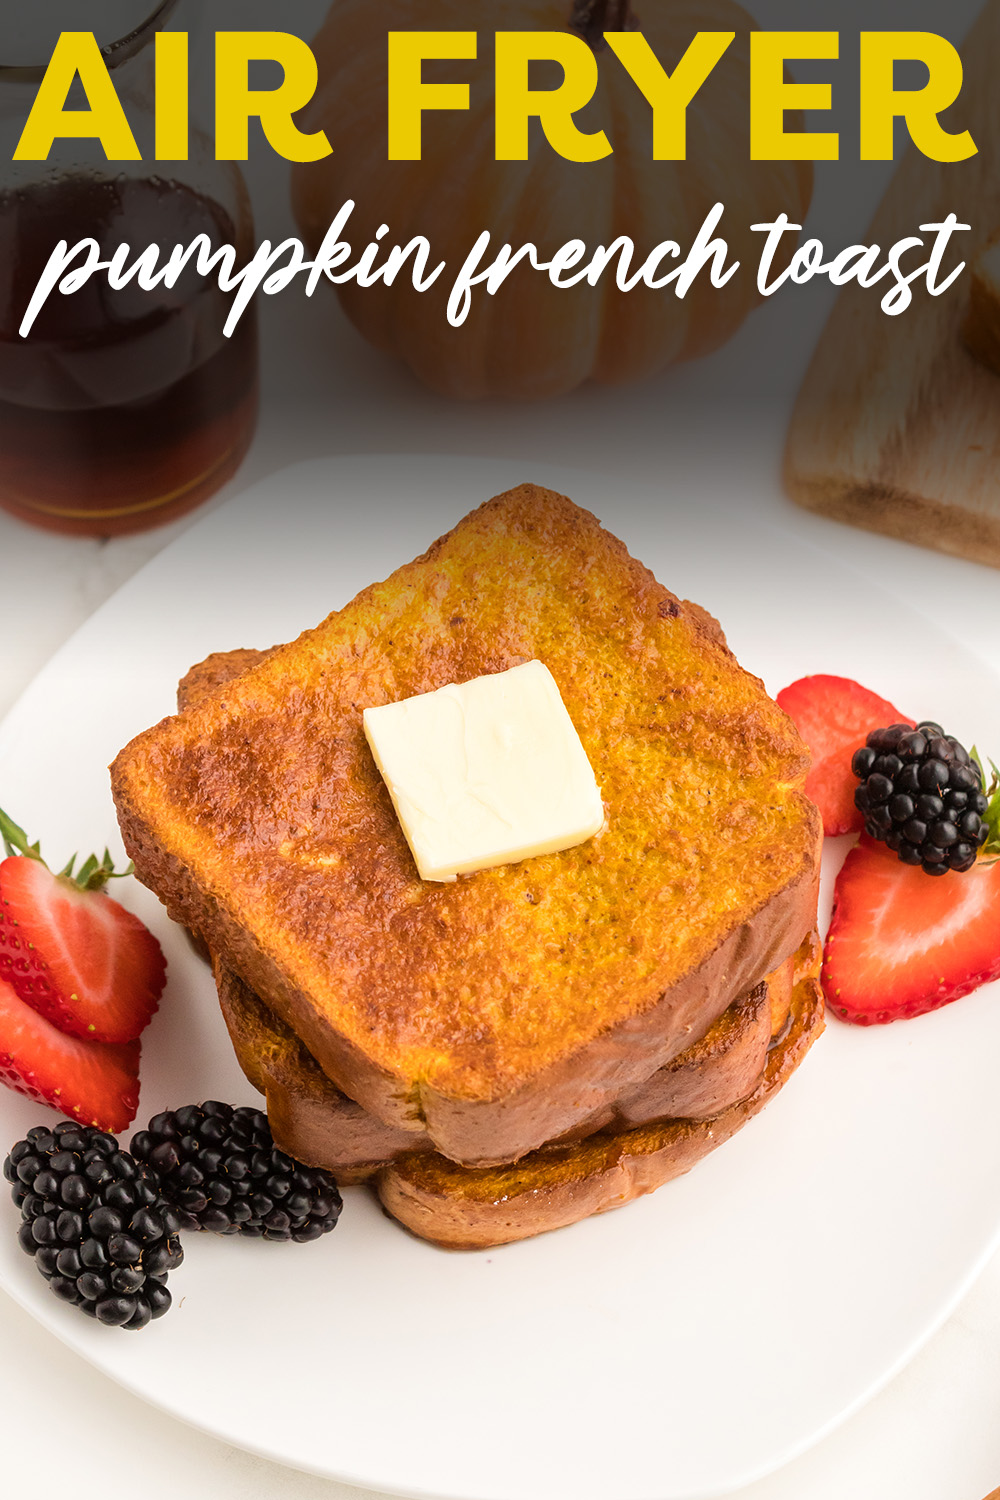 This air fryer pumpkin French toast recipe is a perfect way to start off the autumn season!